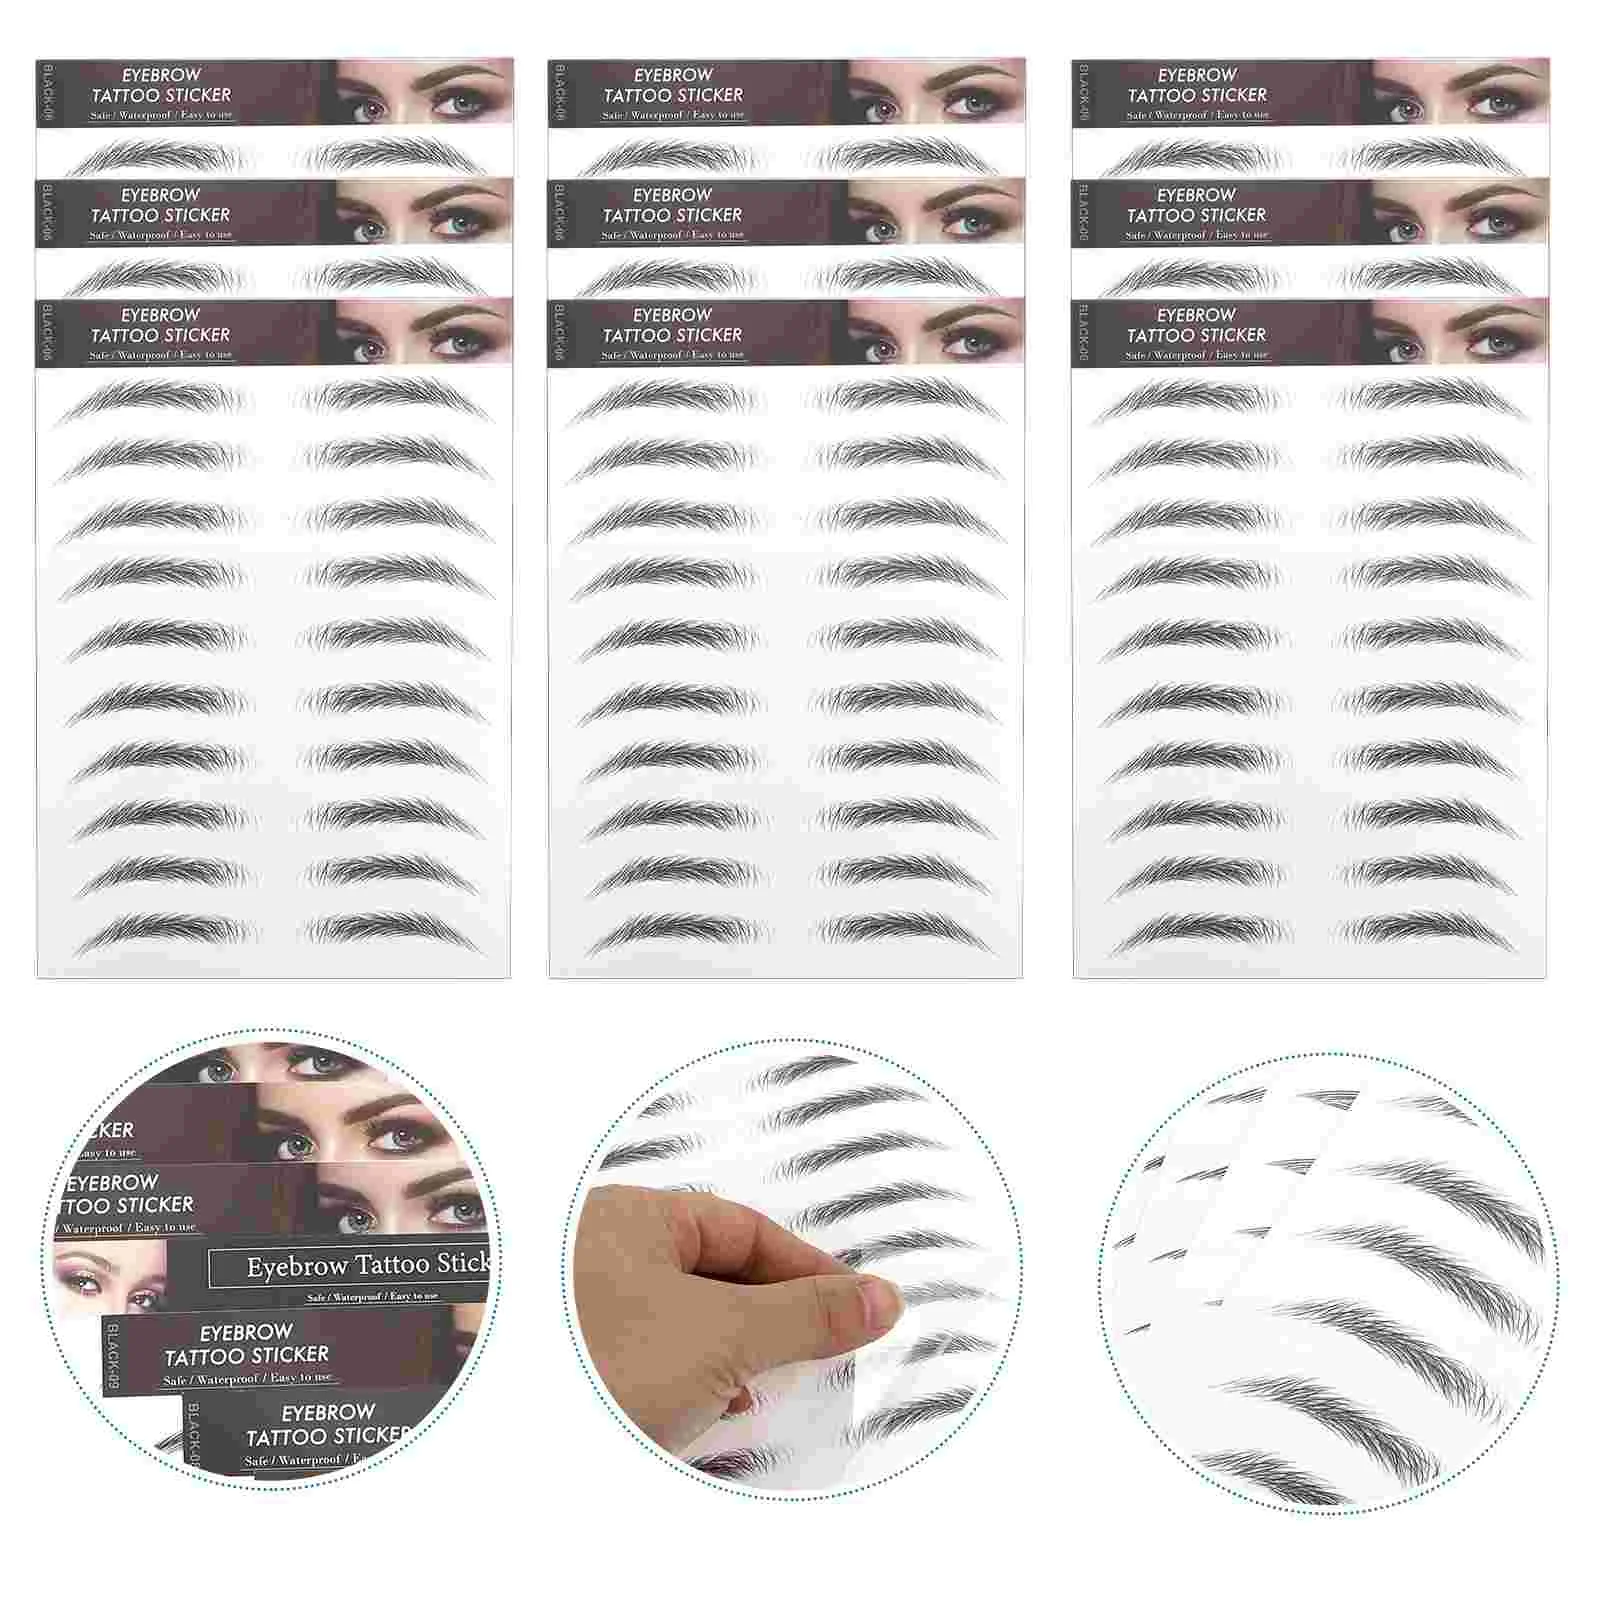 

Eyebrow Sticker Stickers Transfers Shaping Eyebrows Grooming 4D Women Fake Colors Temporary Water Transfer Hair Makeup False